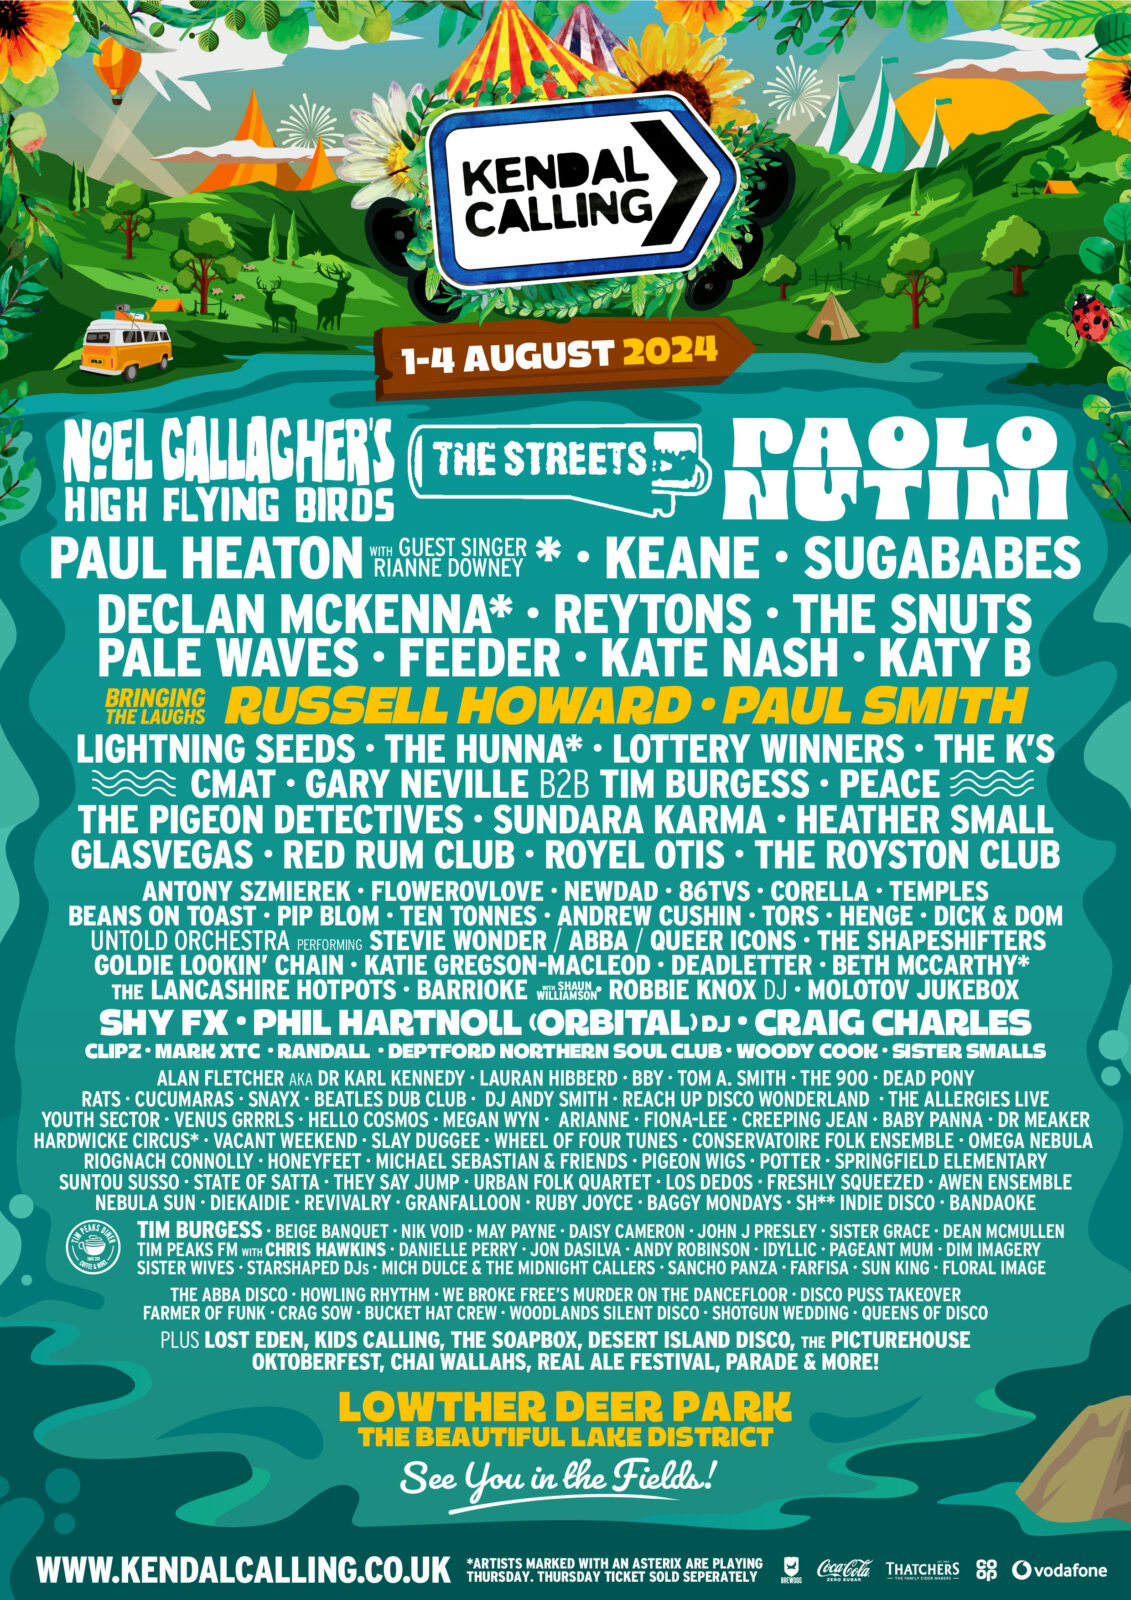 who is at kendal calling this year?